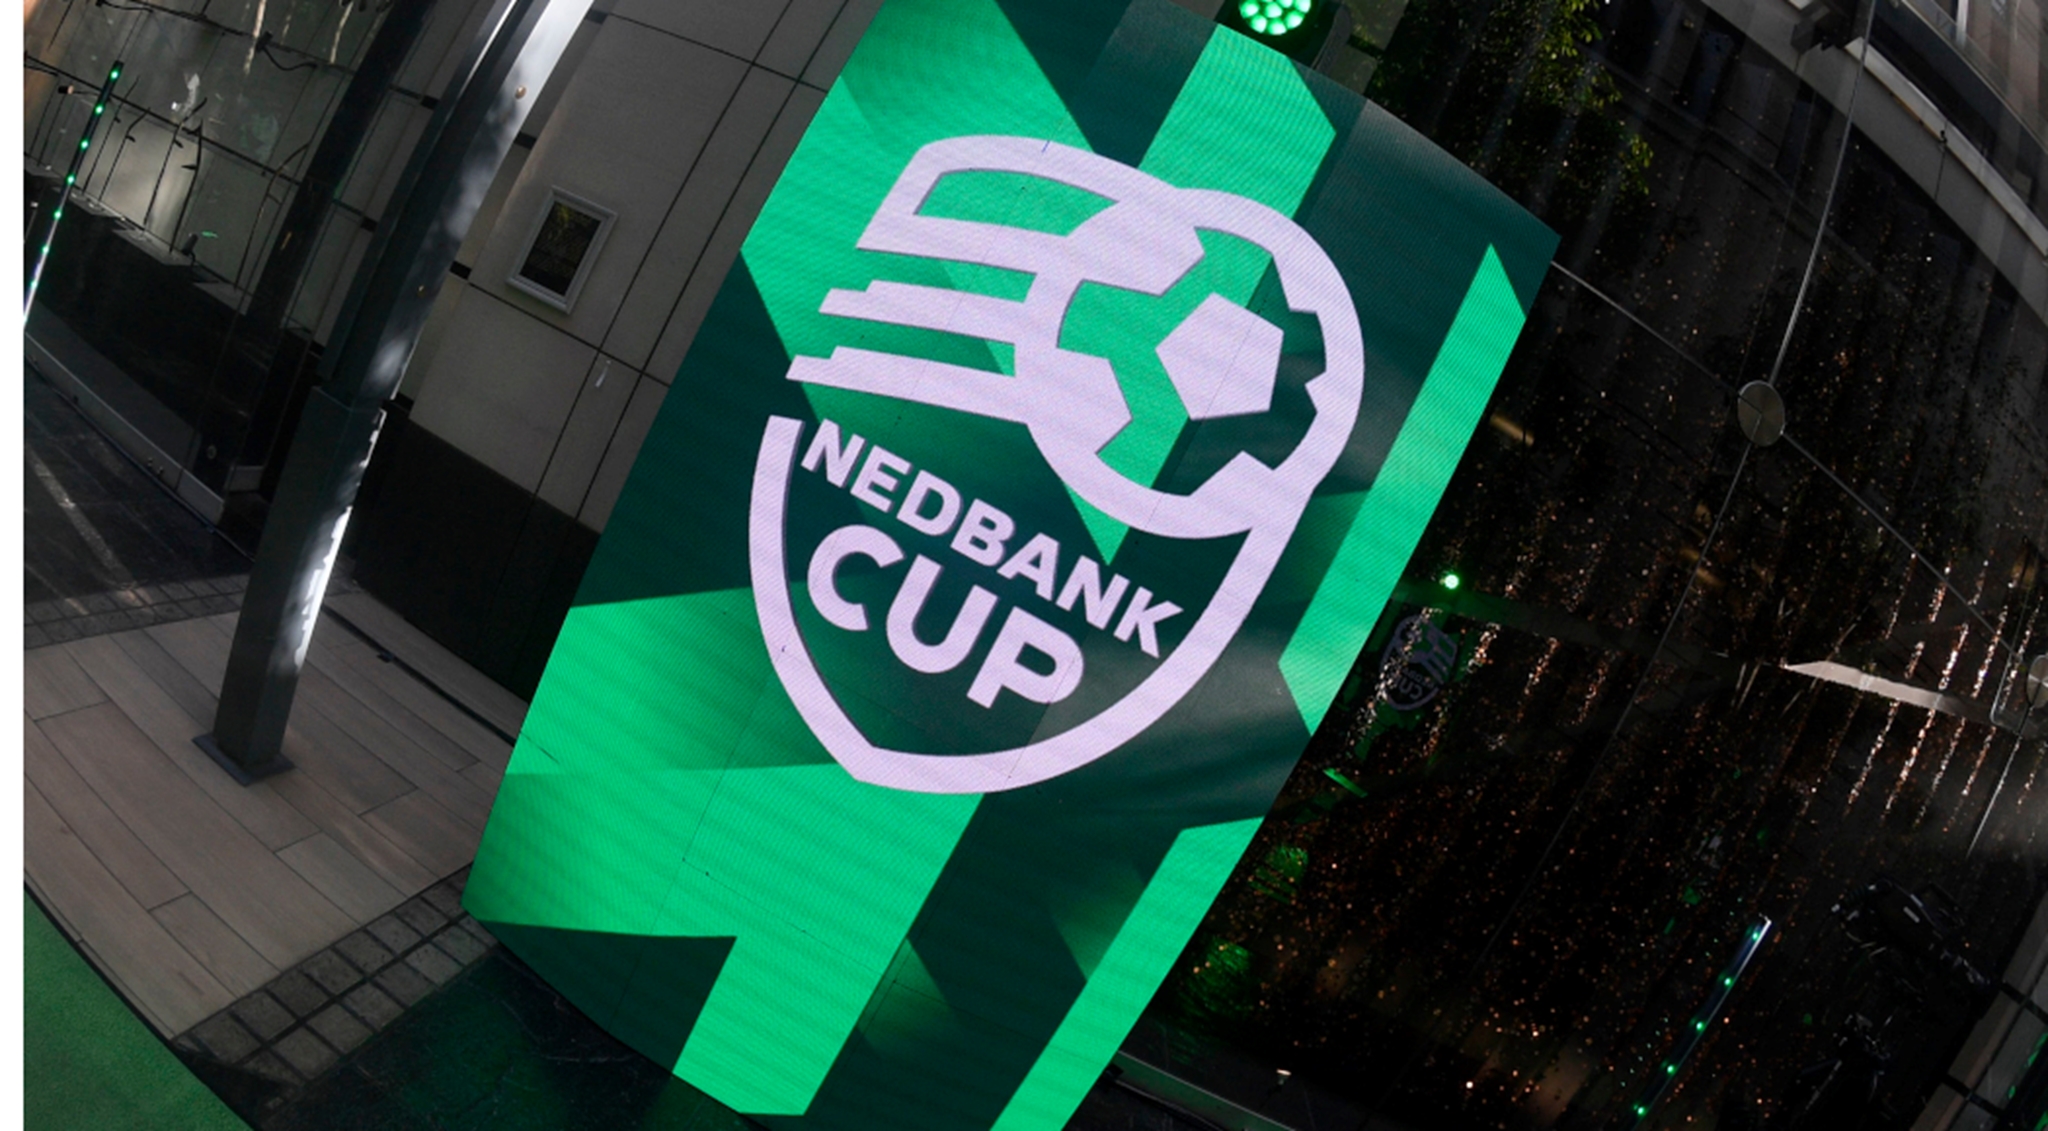 Nedbank Cup – On the Pitch